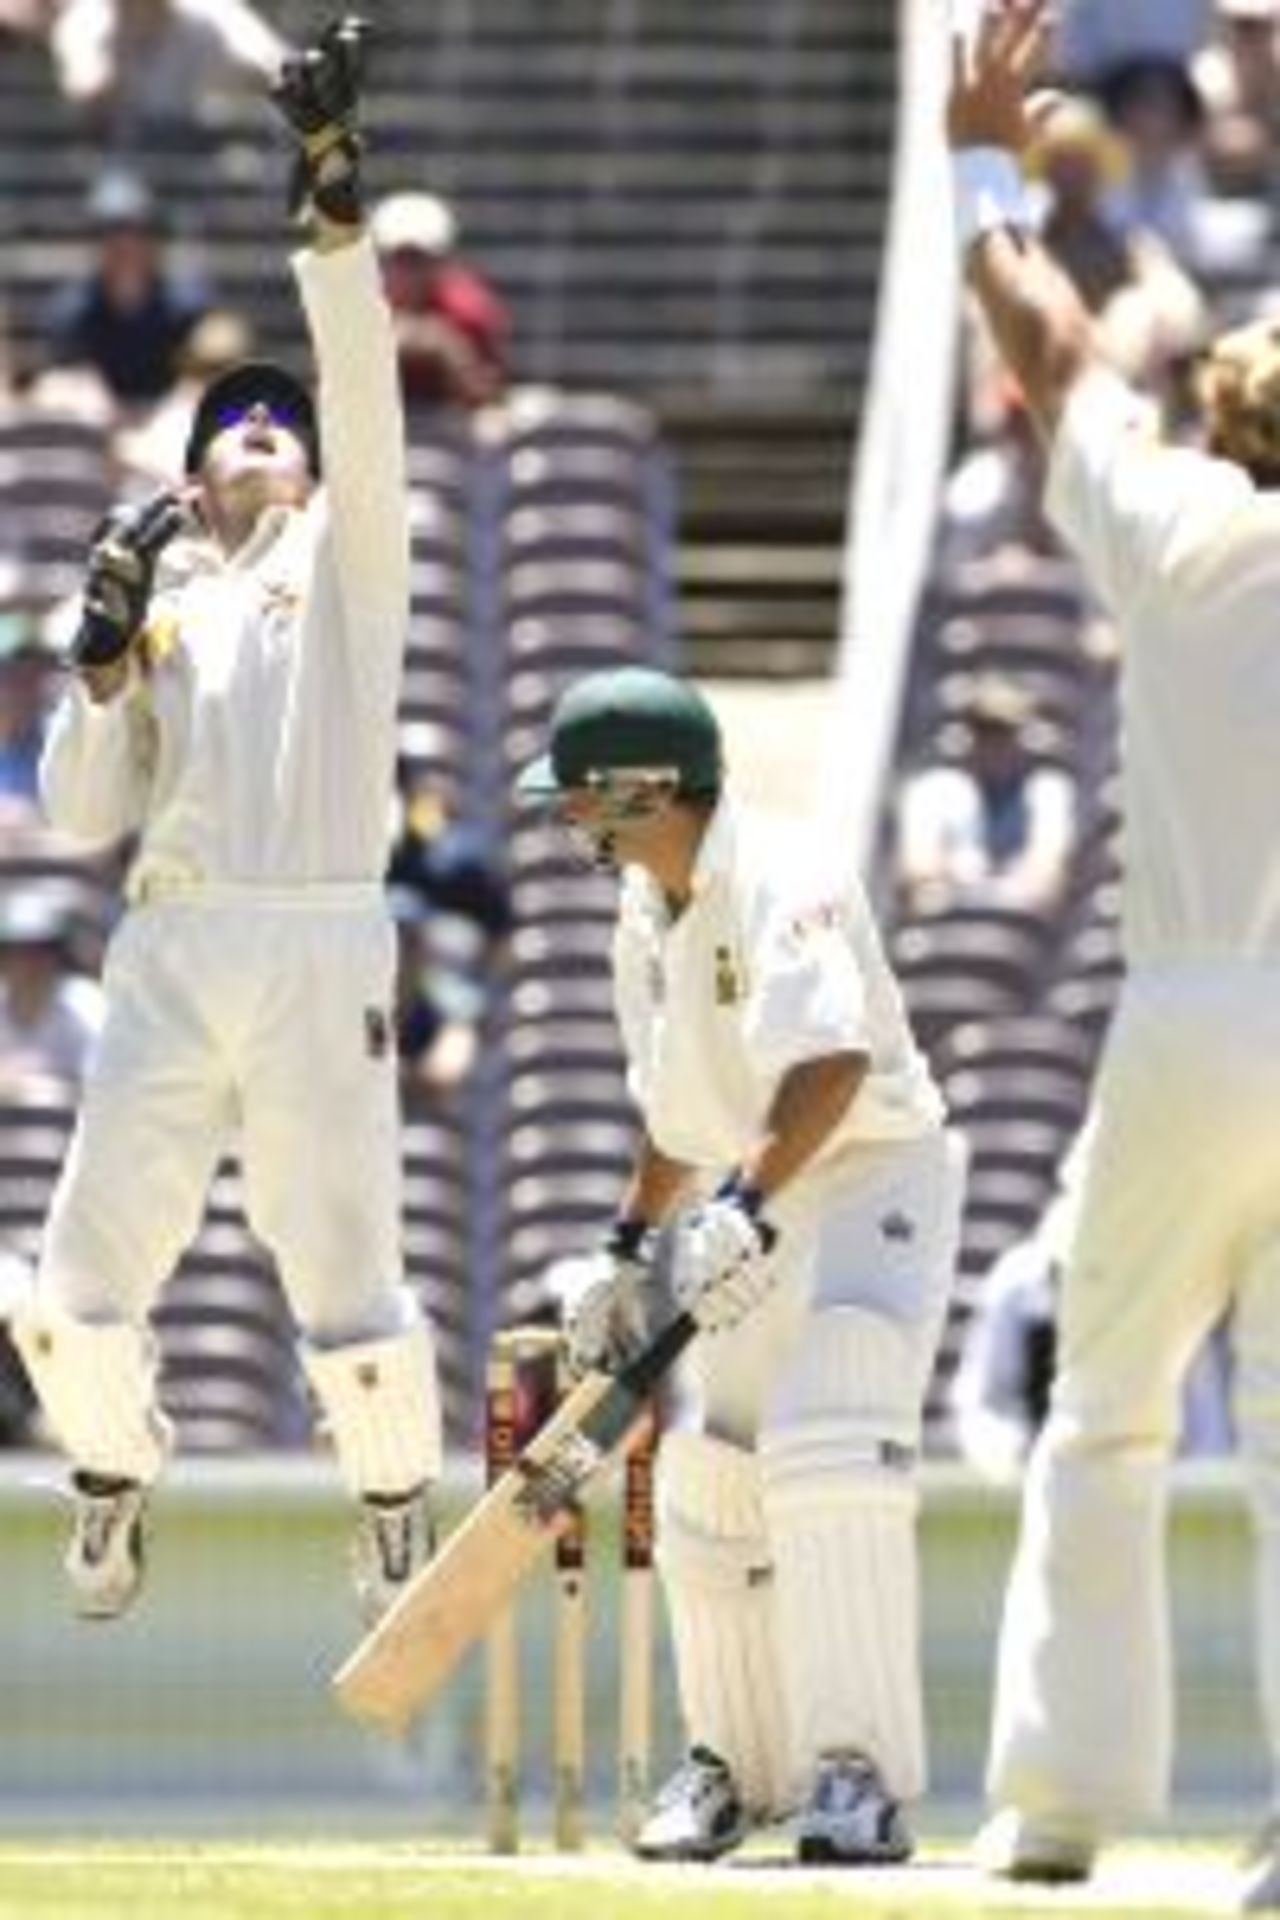 29 Dec 2001: Neil McKenzie of South Africa is out caught by Adam Gilchrist of Australia off the bowling of Shane Warne for 12, during day four of the second Test between Australia and South Africa, played at the Melbourne Cricket Ground, Melbourne, Australia.